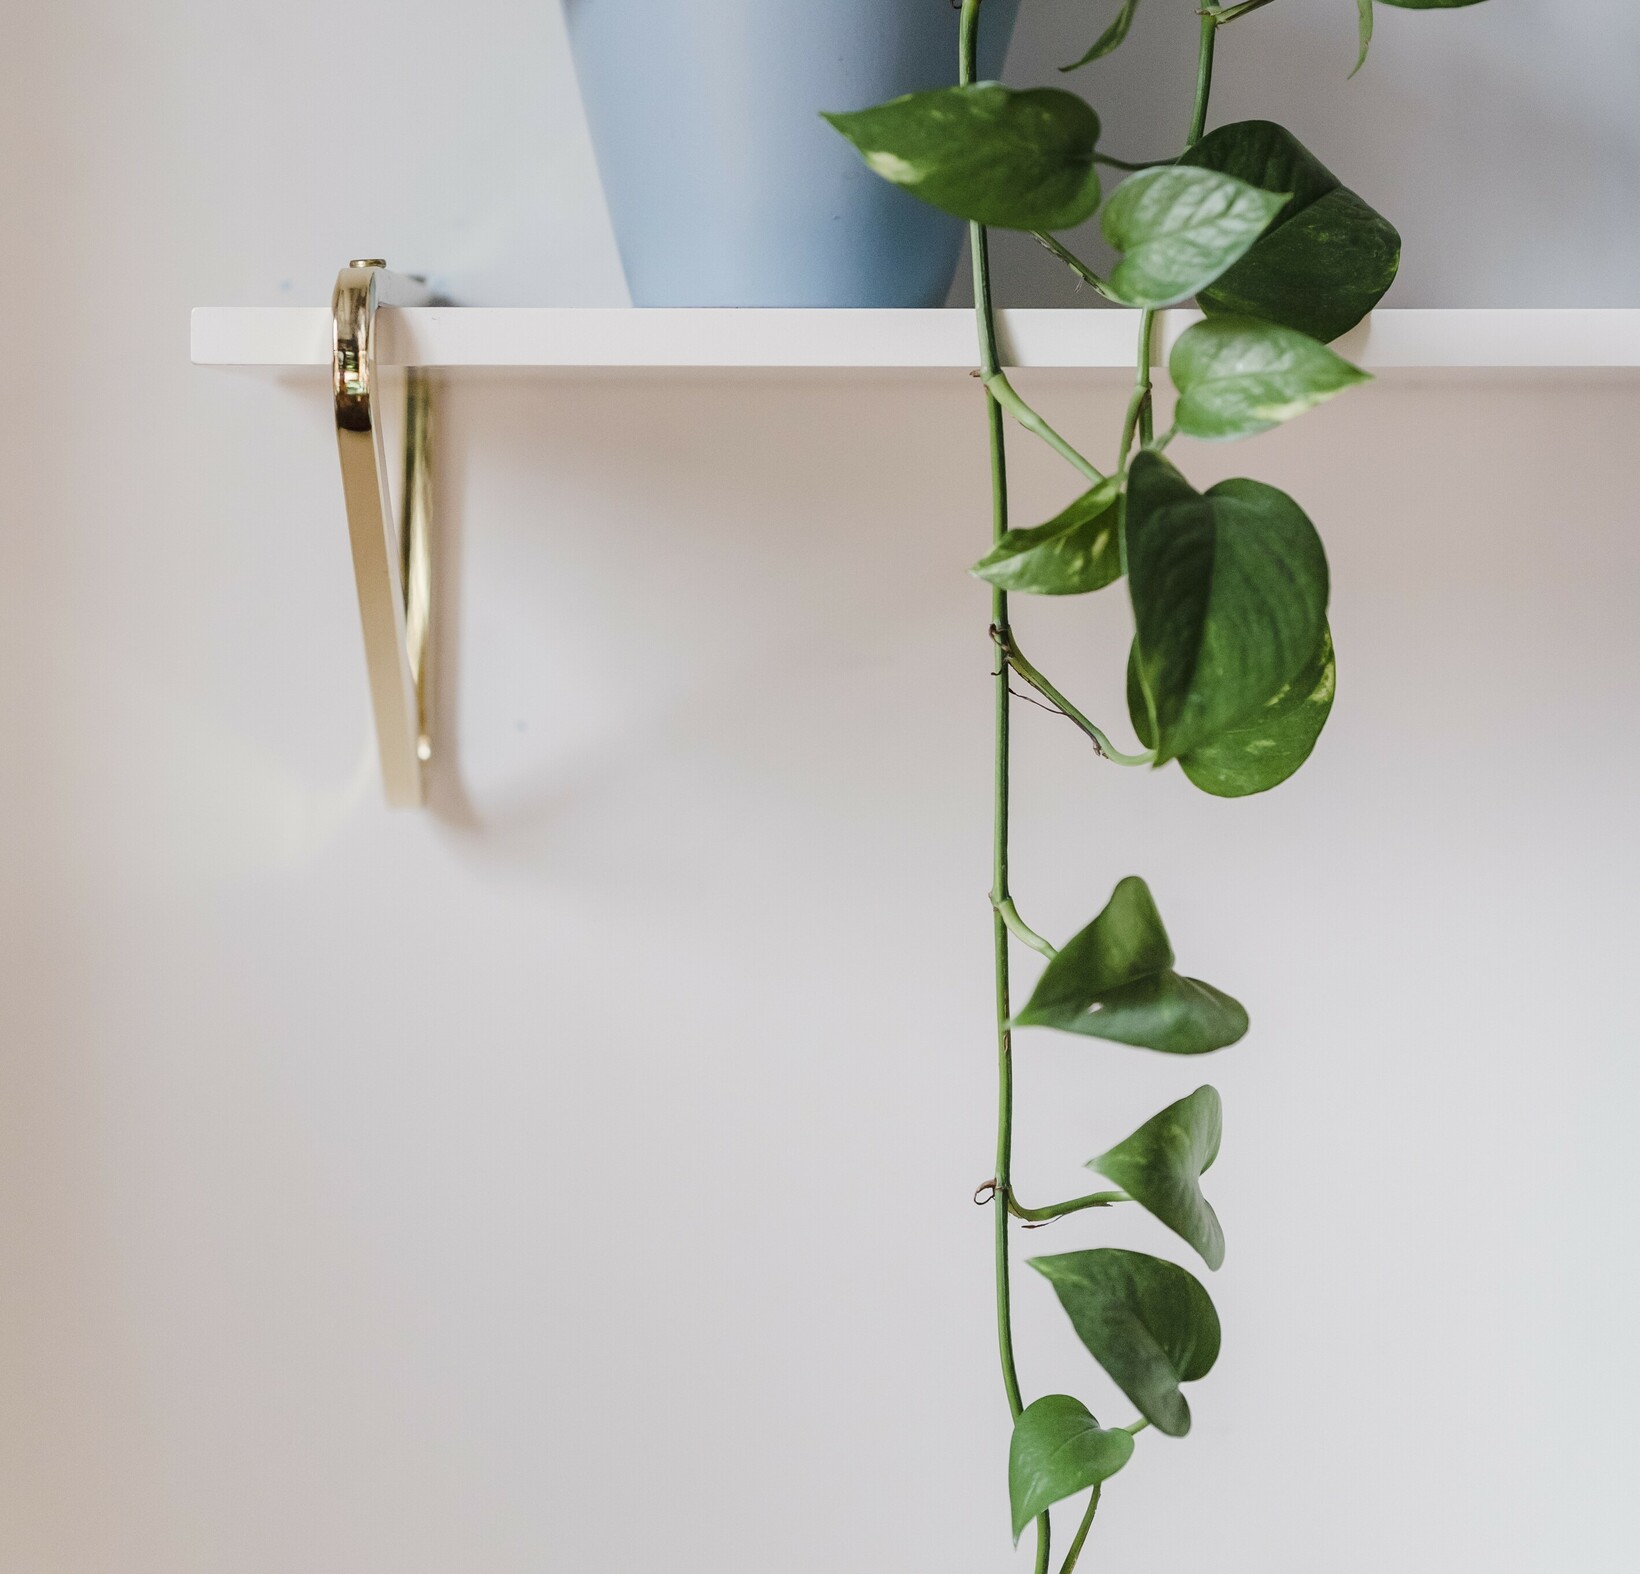 Potted green plant on white shelf